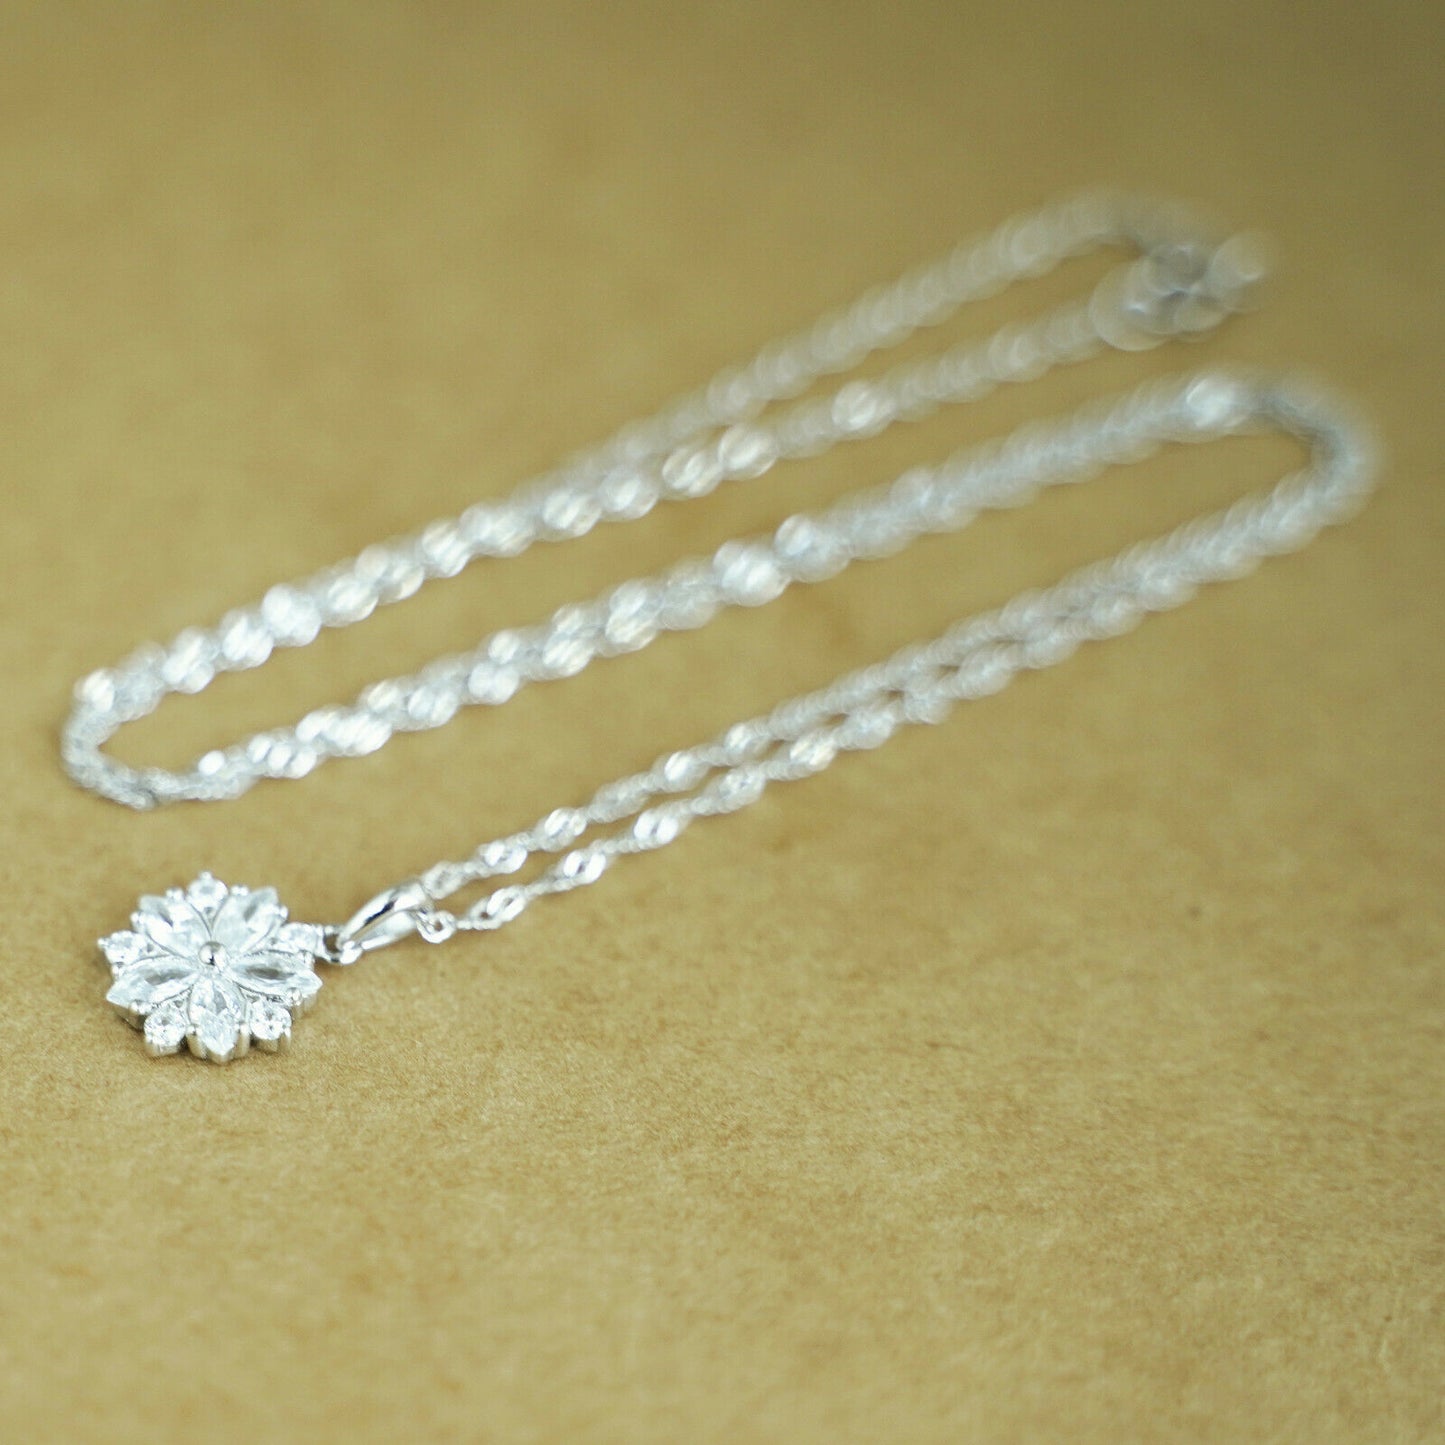 Sterling Silver CZ Crystal Snowflake Flower Pendant Necklace 3 Chains - sugarkittenlondon